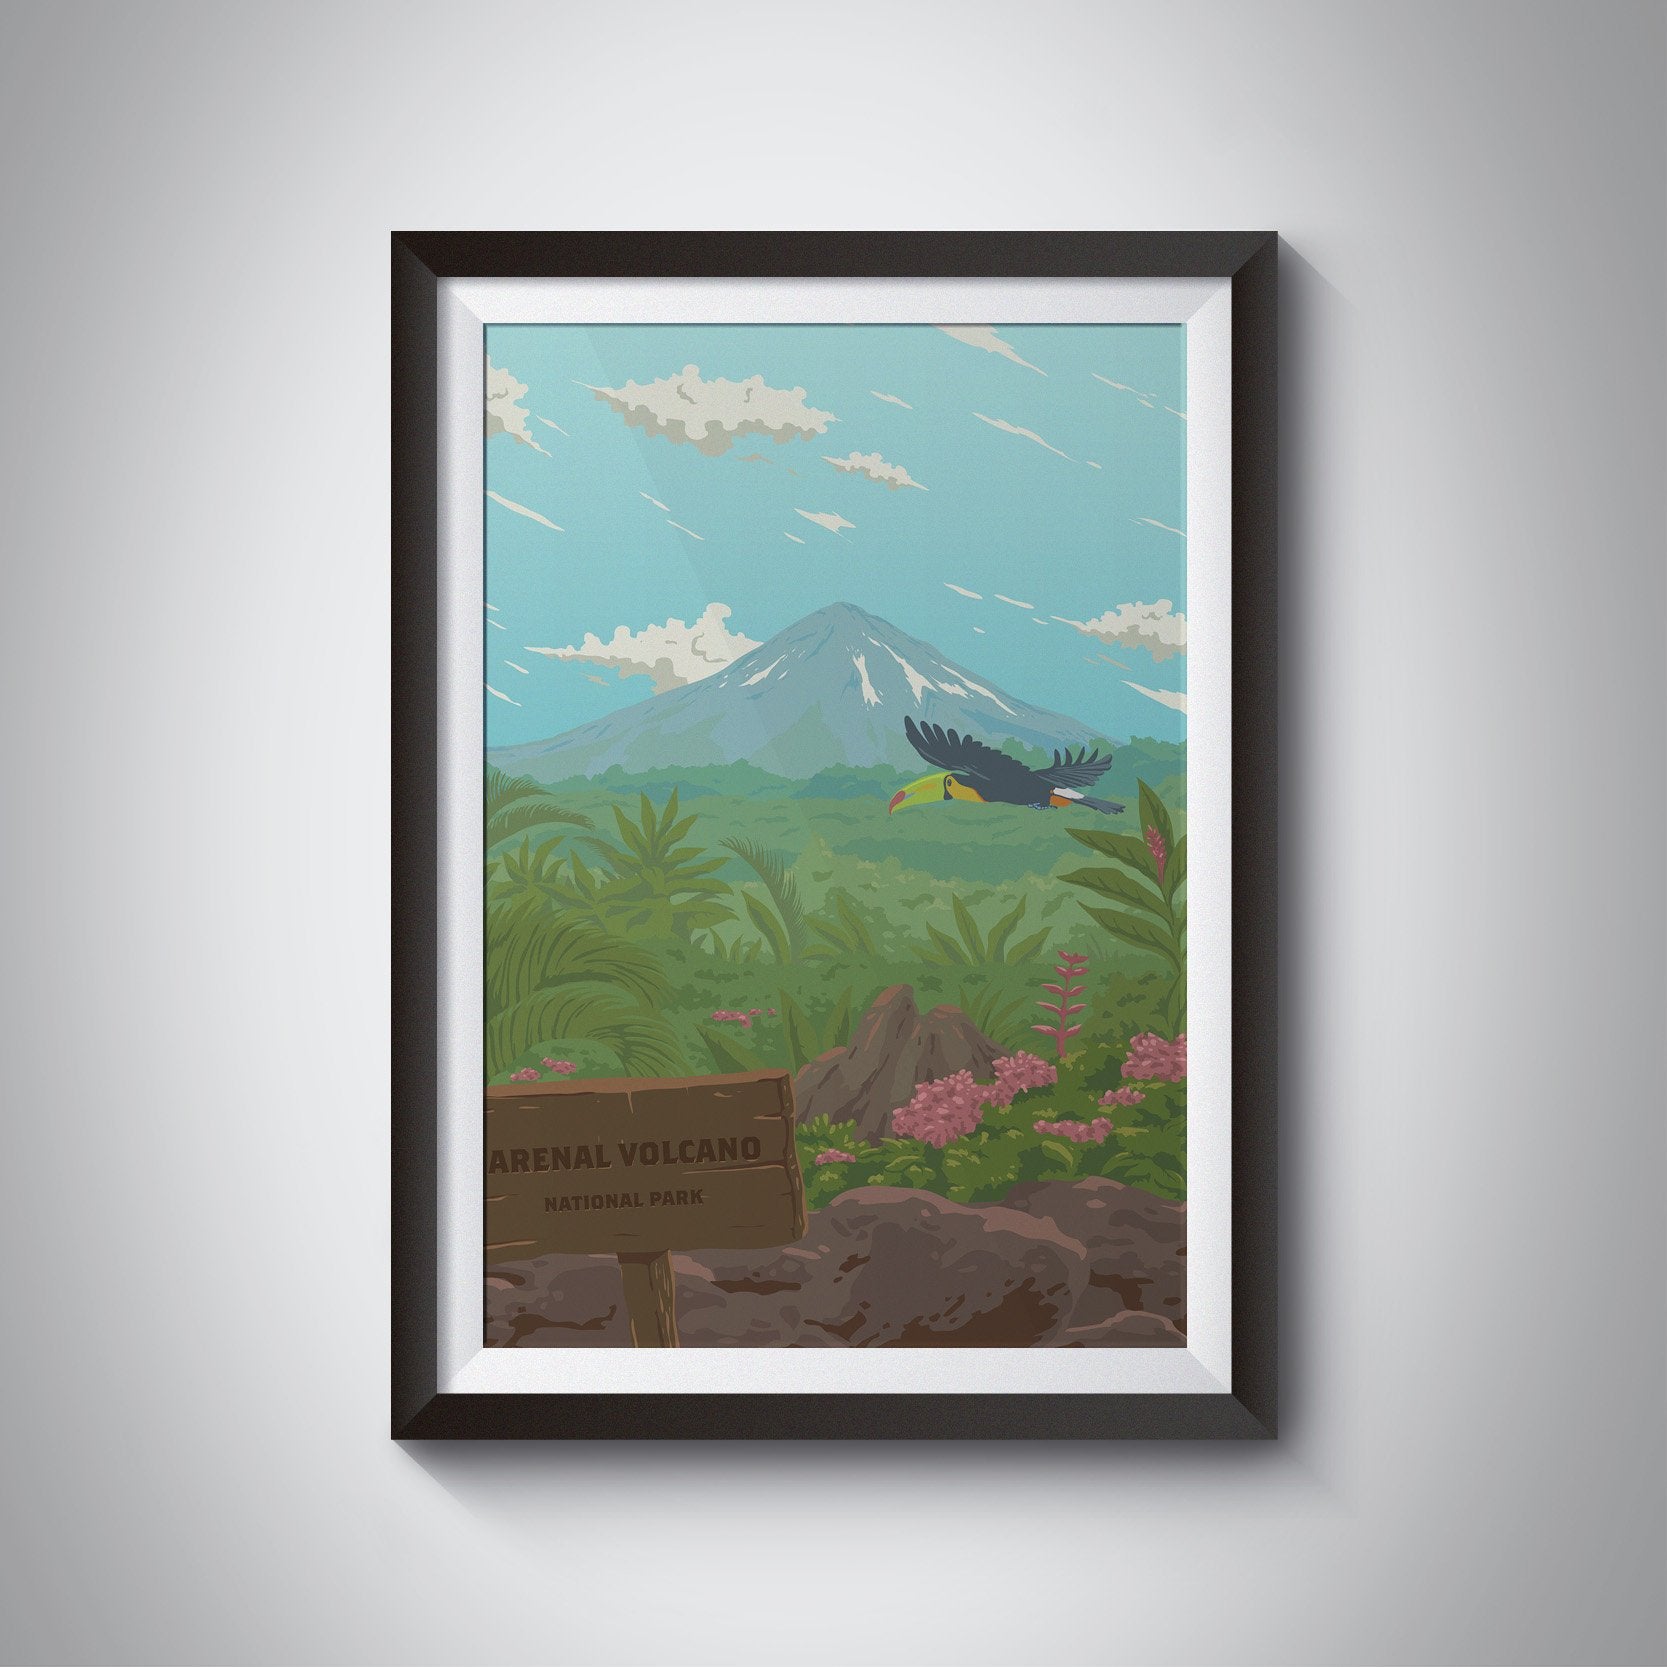 Arenal Volcano National Park, Costa Rica Travel Poster